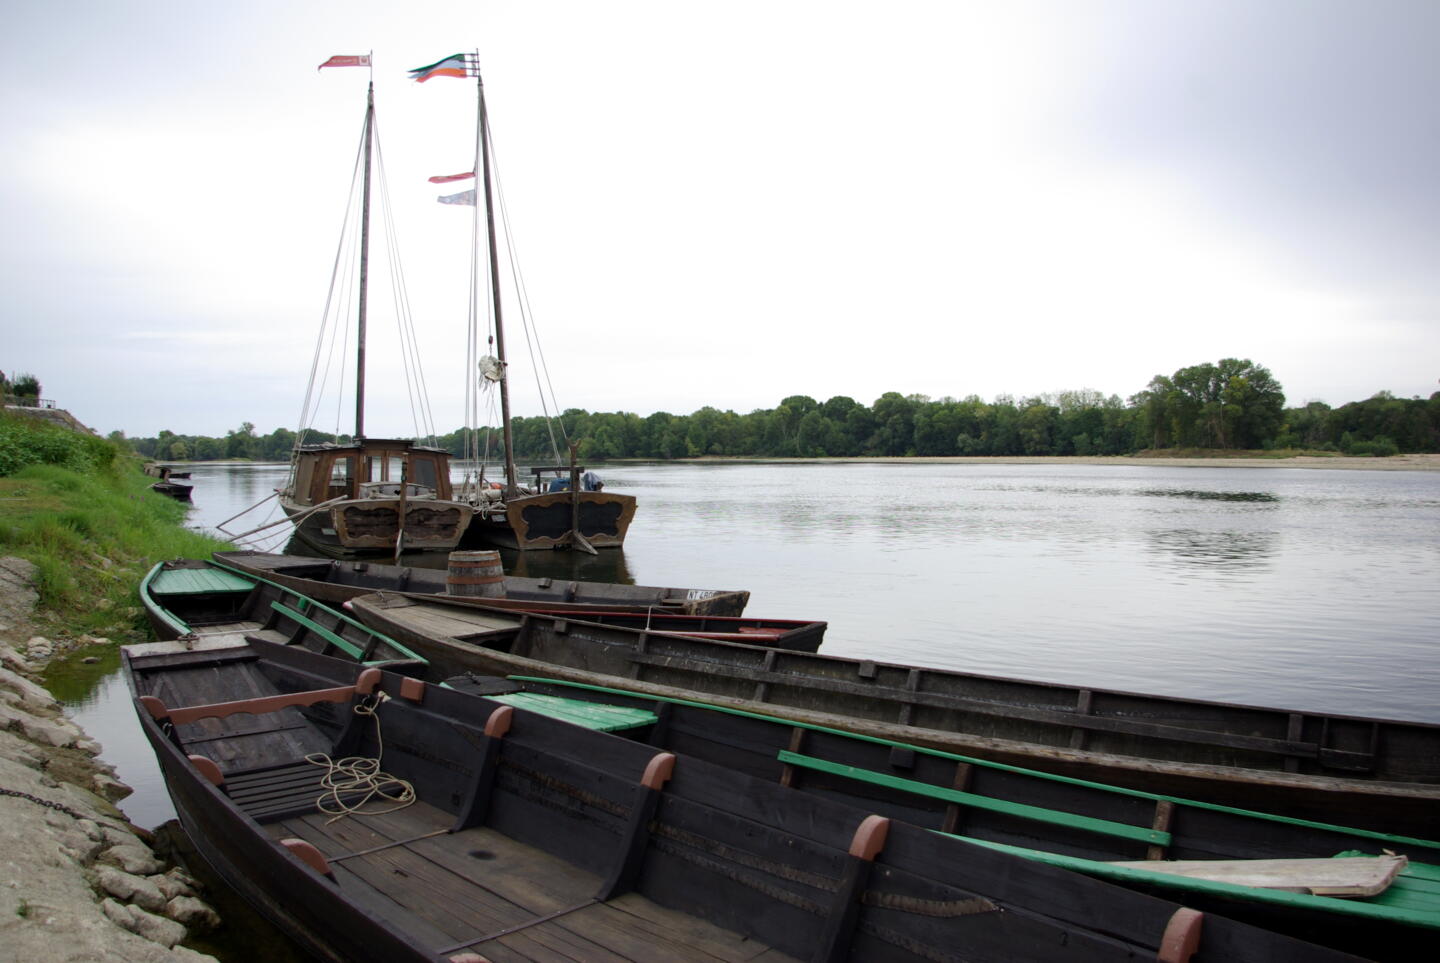 Traditional boats moored on the Loire, ready for the Festival de la Loire, celebrating river heritage.